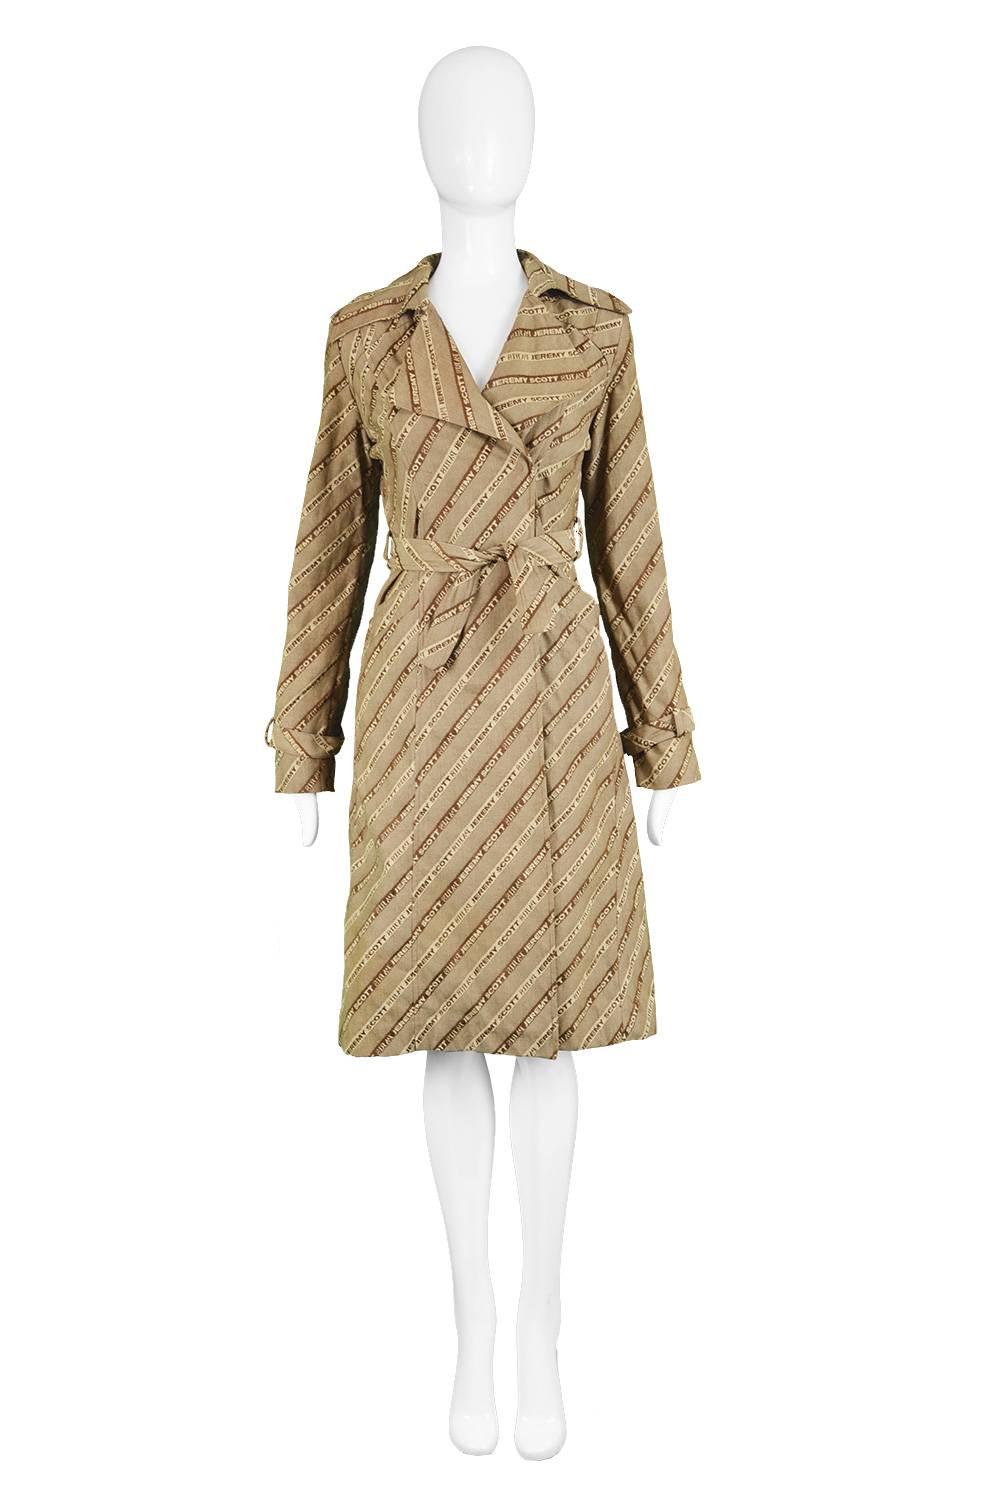 Iconic Jeremy Scott Logomania 'Duty Free Glamour' Trench Coat, S/S 2000

Estimated Size: UK 10/ US 6/ EU 36. Please check measurements. 
Bust - 36” / 91cm (allow a couple of inches room for movement)
Waist - 30” / 76cm
Hips - 40” / 101cm
Length